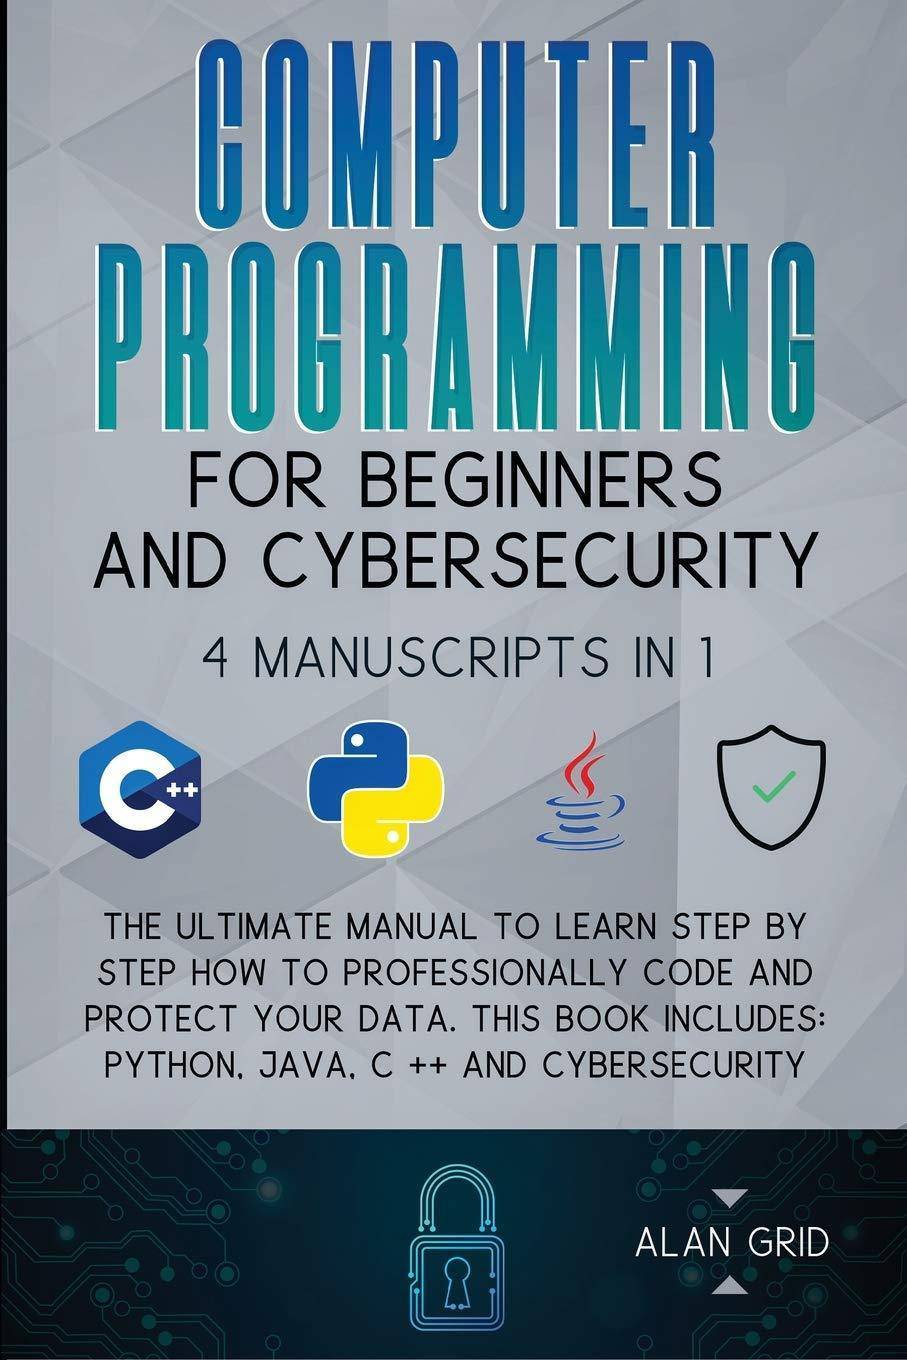 Computer Programming for Beginners and Cybersecurity - SureShot Books Publishing LLC